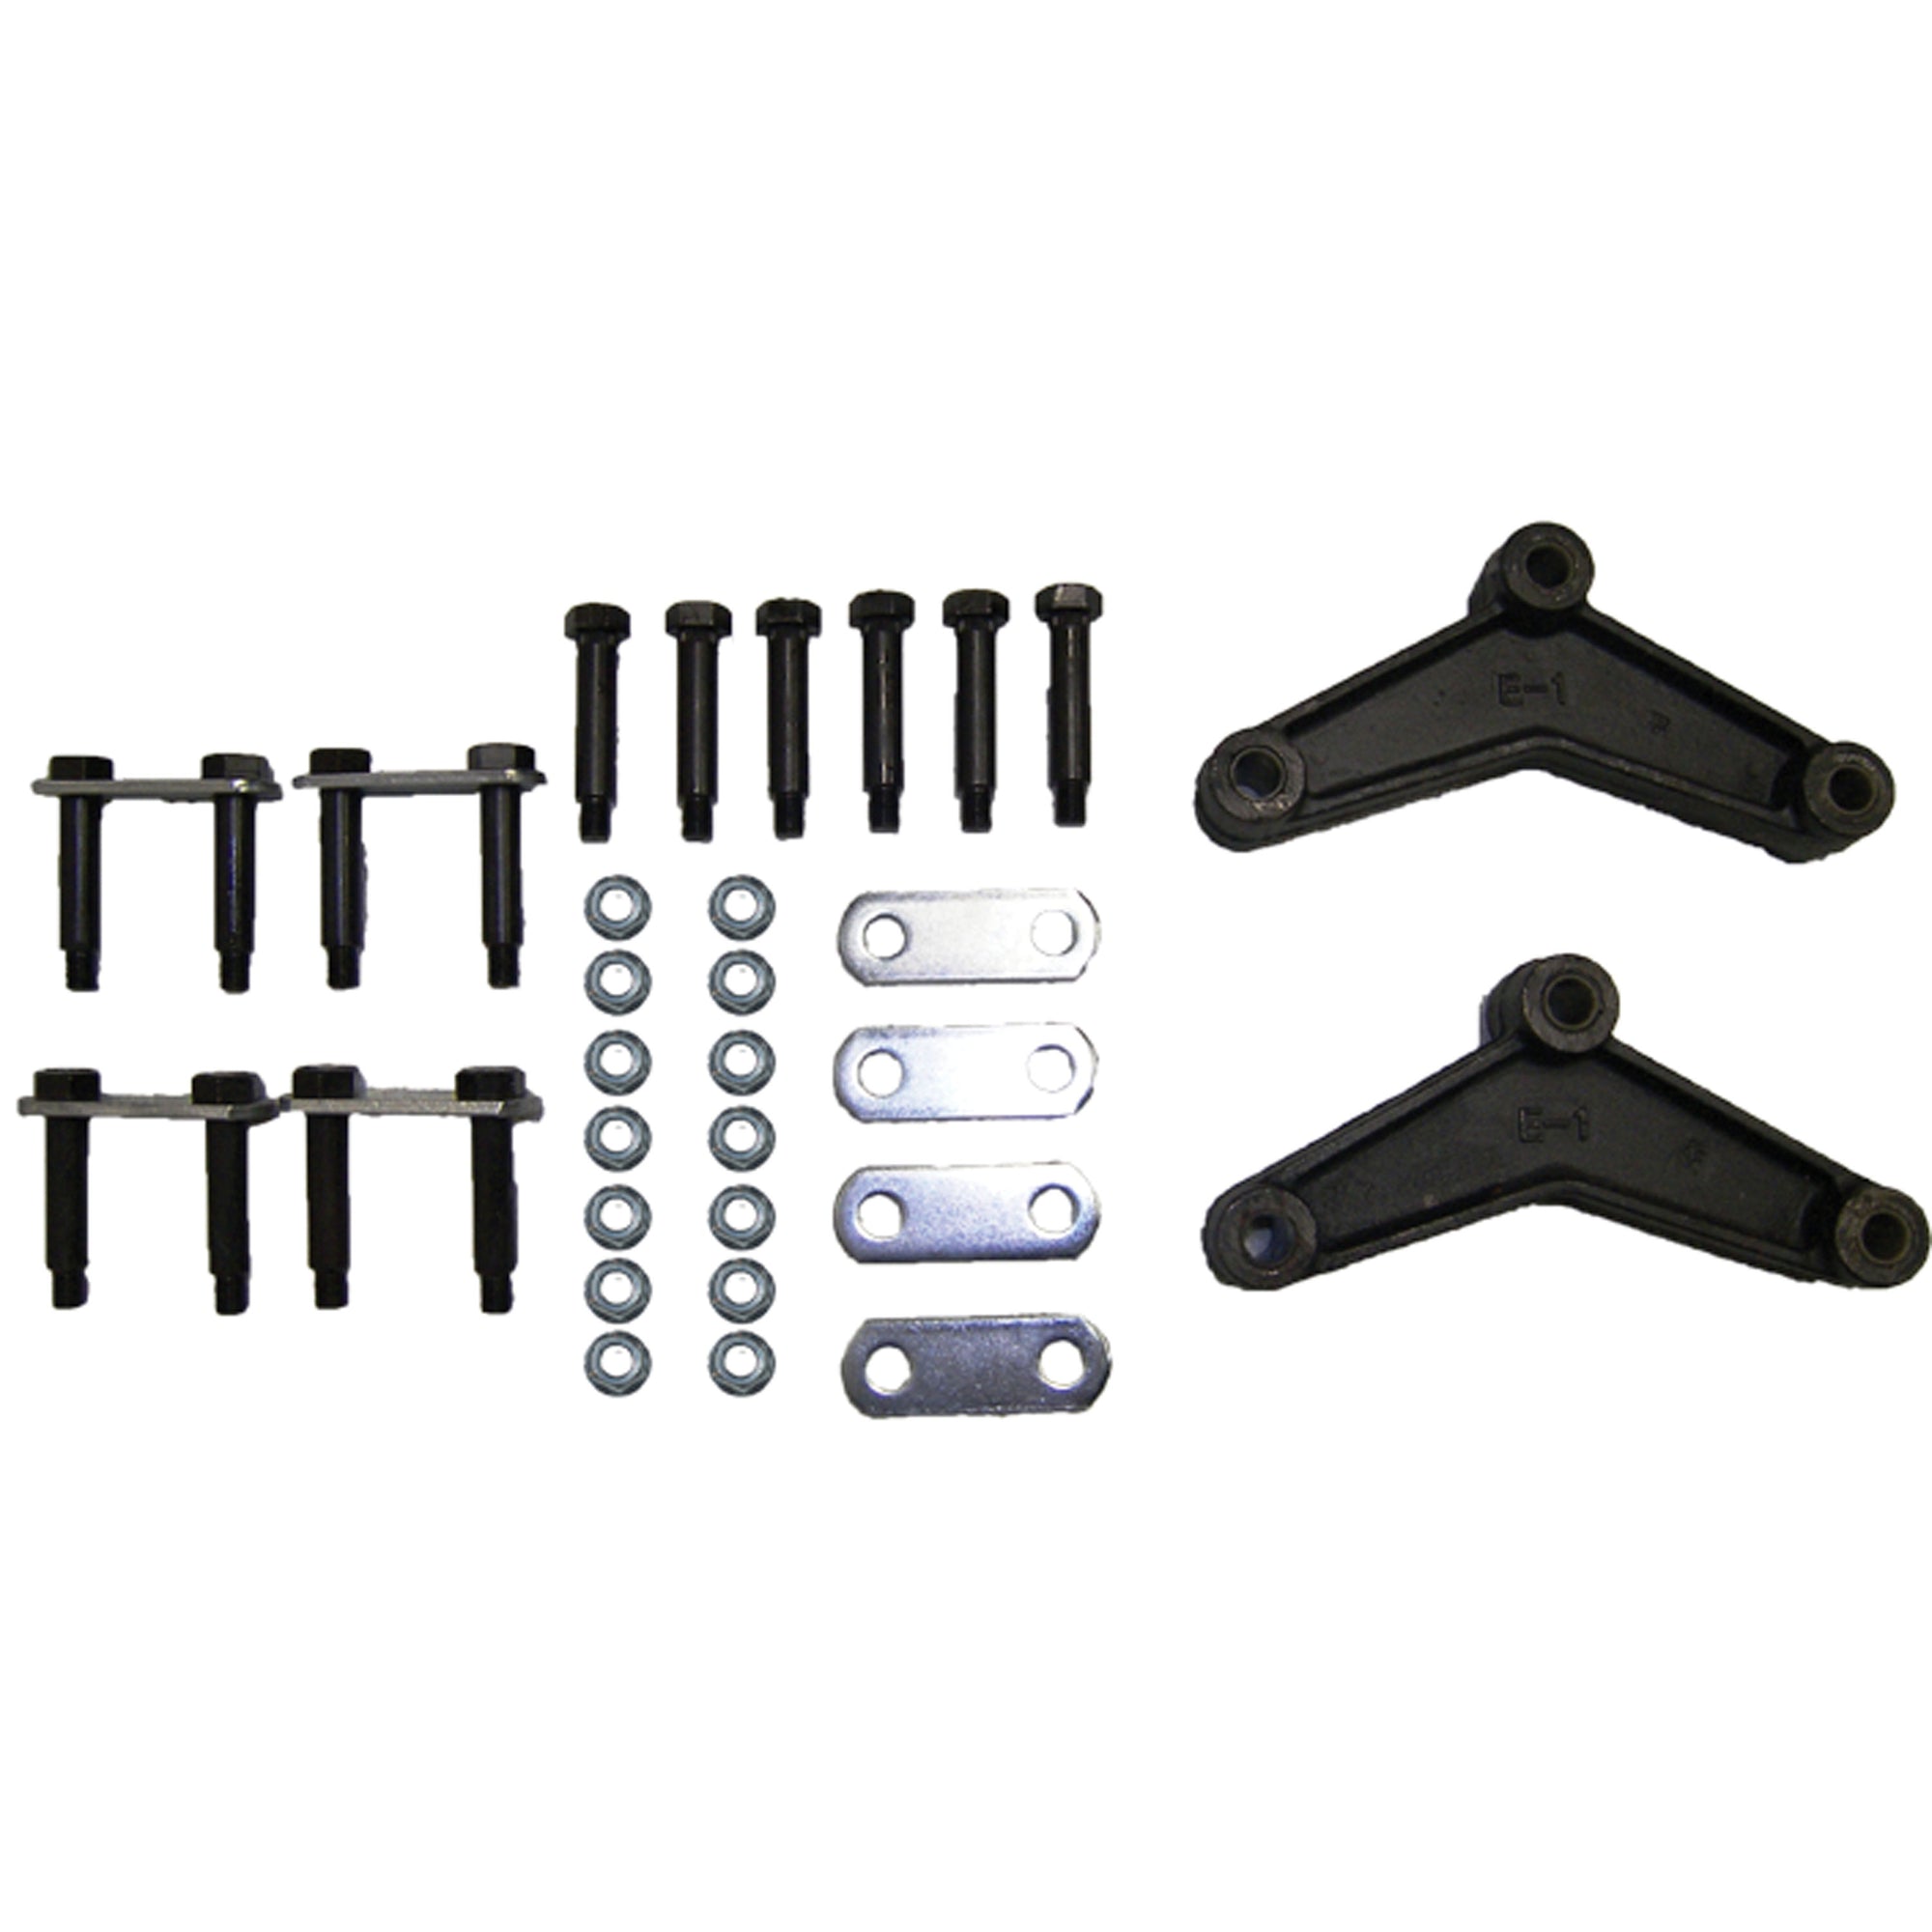 AP Products 014-121099 Tandem Axle Shackle Kit - 16" Tandem for 35" Axle Spacing EQ-E1